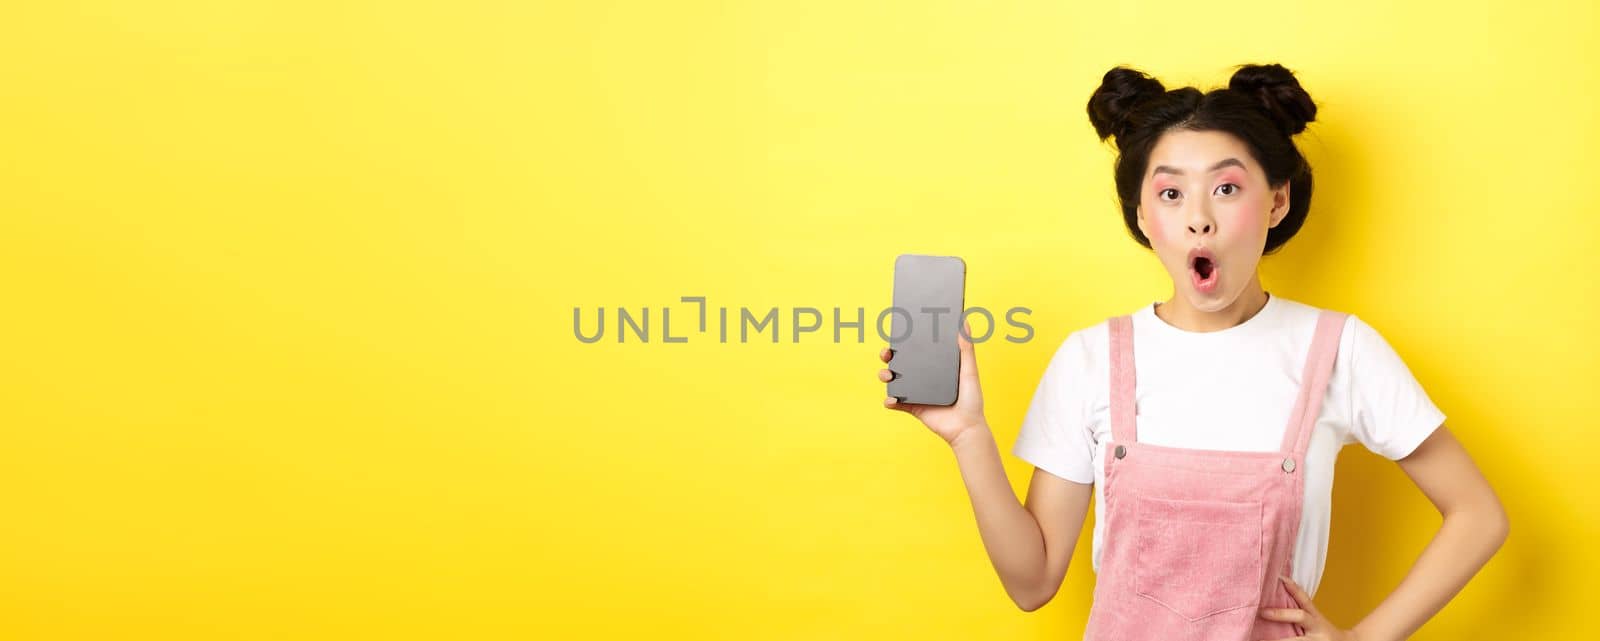 Online shopping concept. Excited stylish asian girl say wow, showing empty cell phone screen and look amazed, yellow background.